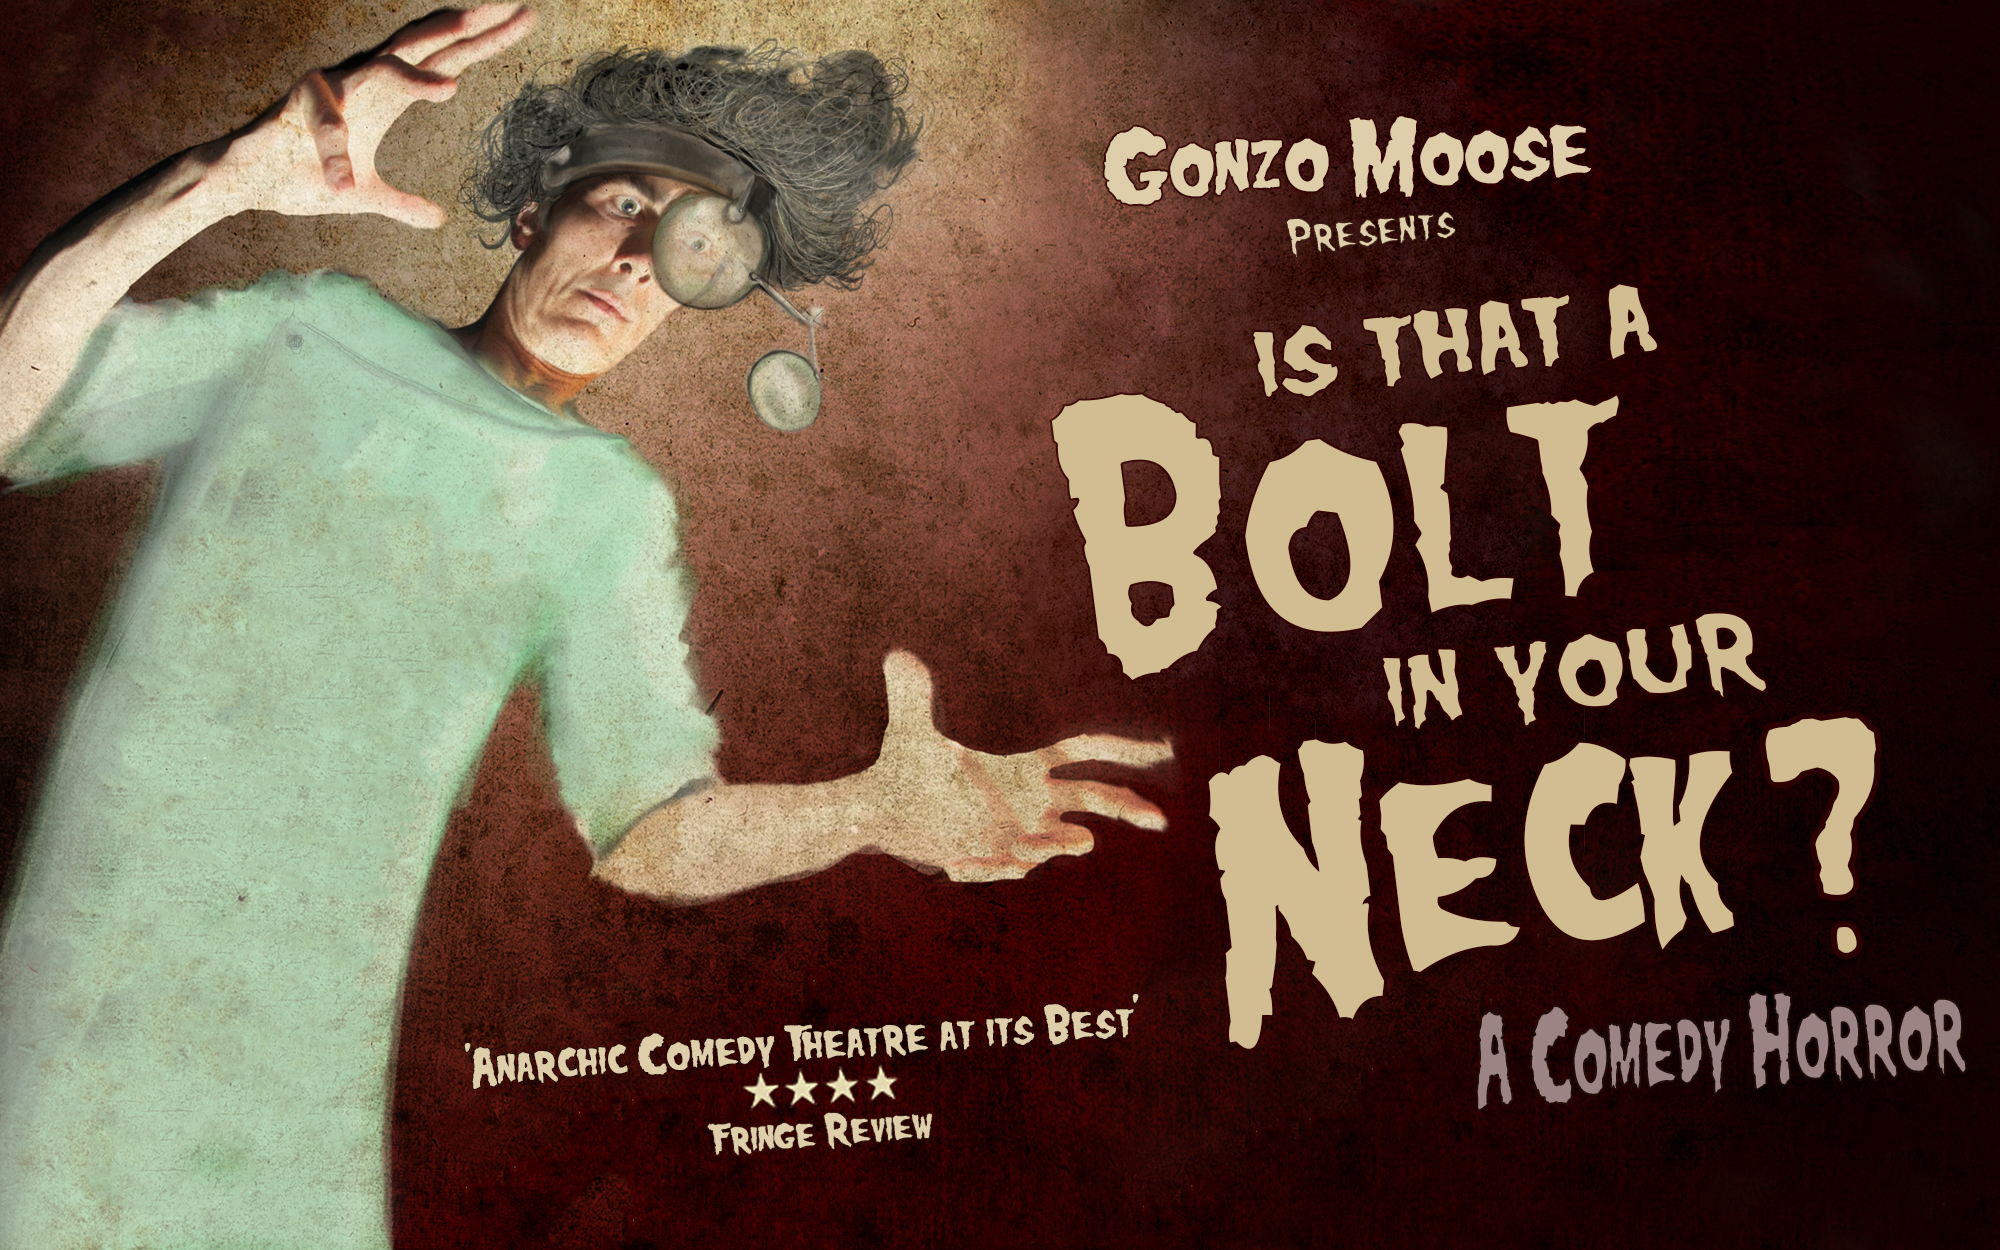 Gonzo Moose presents 'Is That A Bolt In Your Neck?'